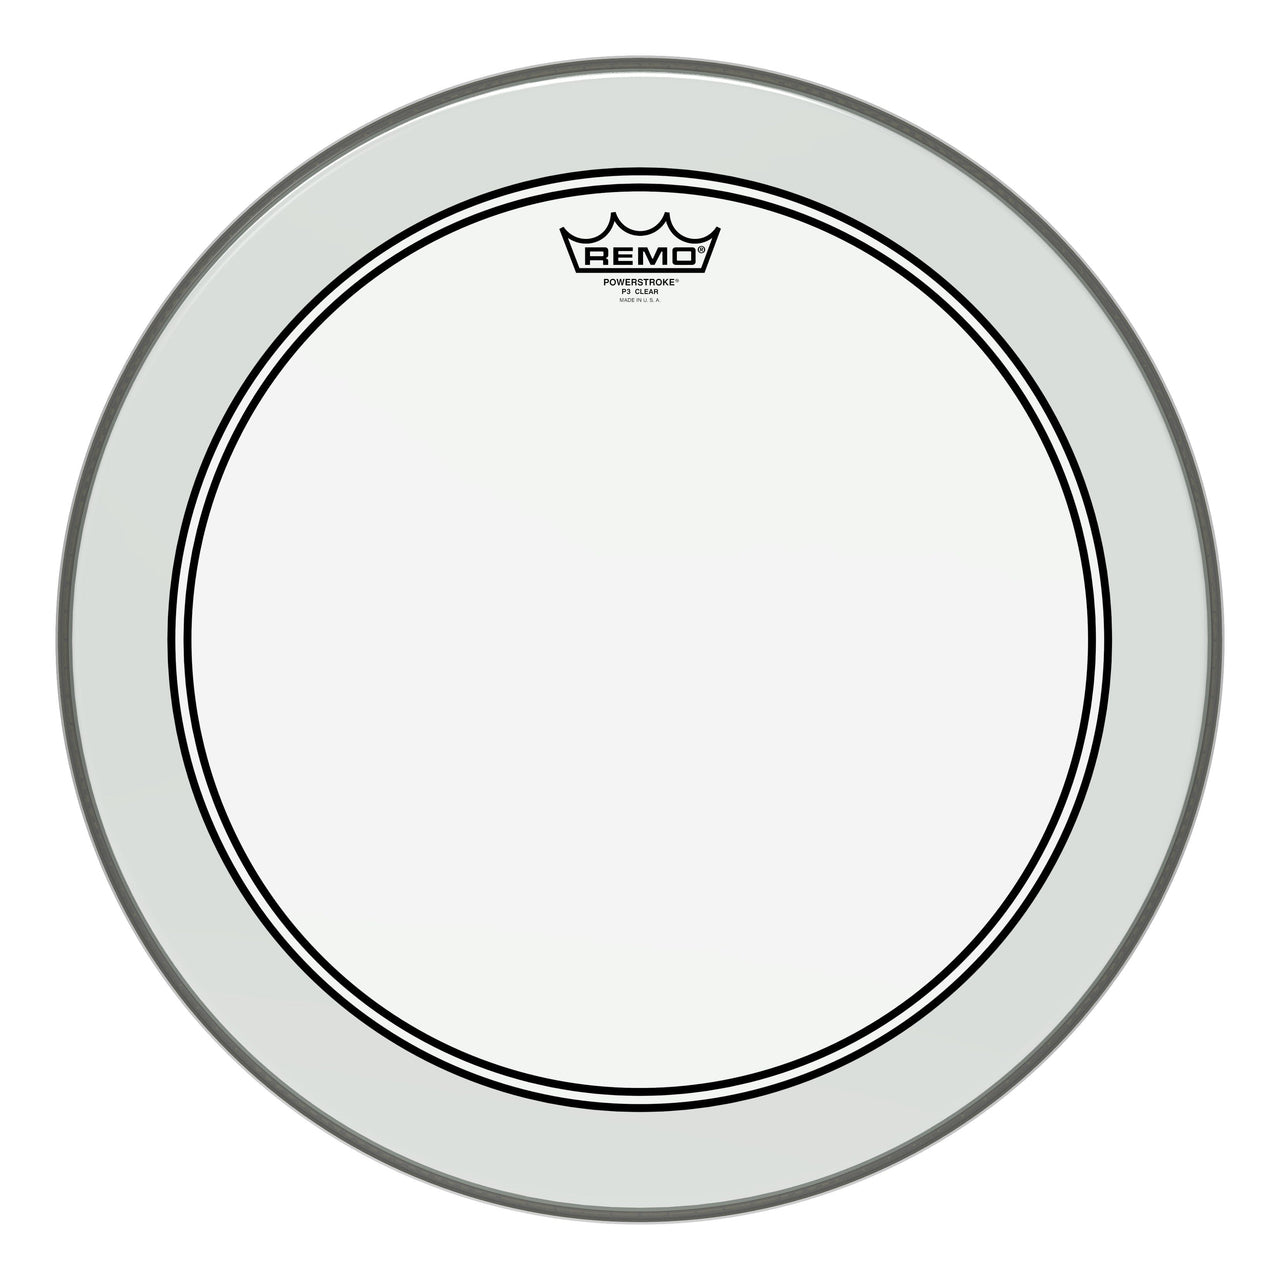 Remo 18" Powerstroke 3 Clear Drum Head (P3-0318-BP) Drum Heads Remo 